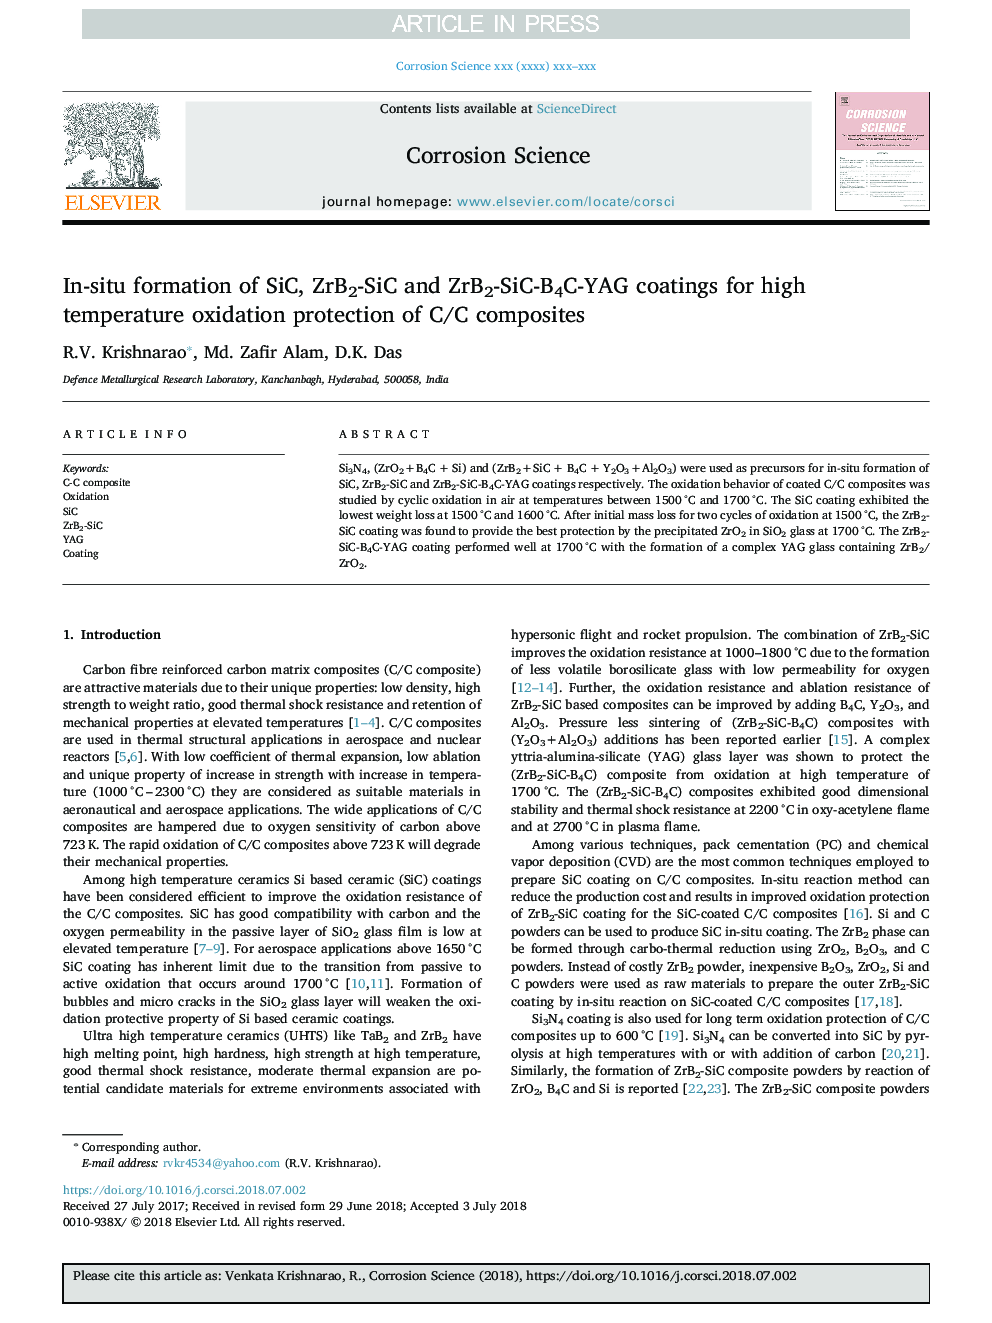 In-situ formation of SiC, ZrB2-SiC and ZrB2-SiC-B4C-YAG coatings for high temperature oxidation protection of C/C composites